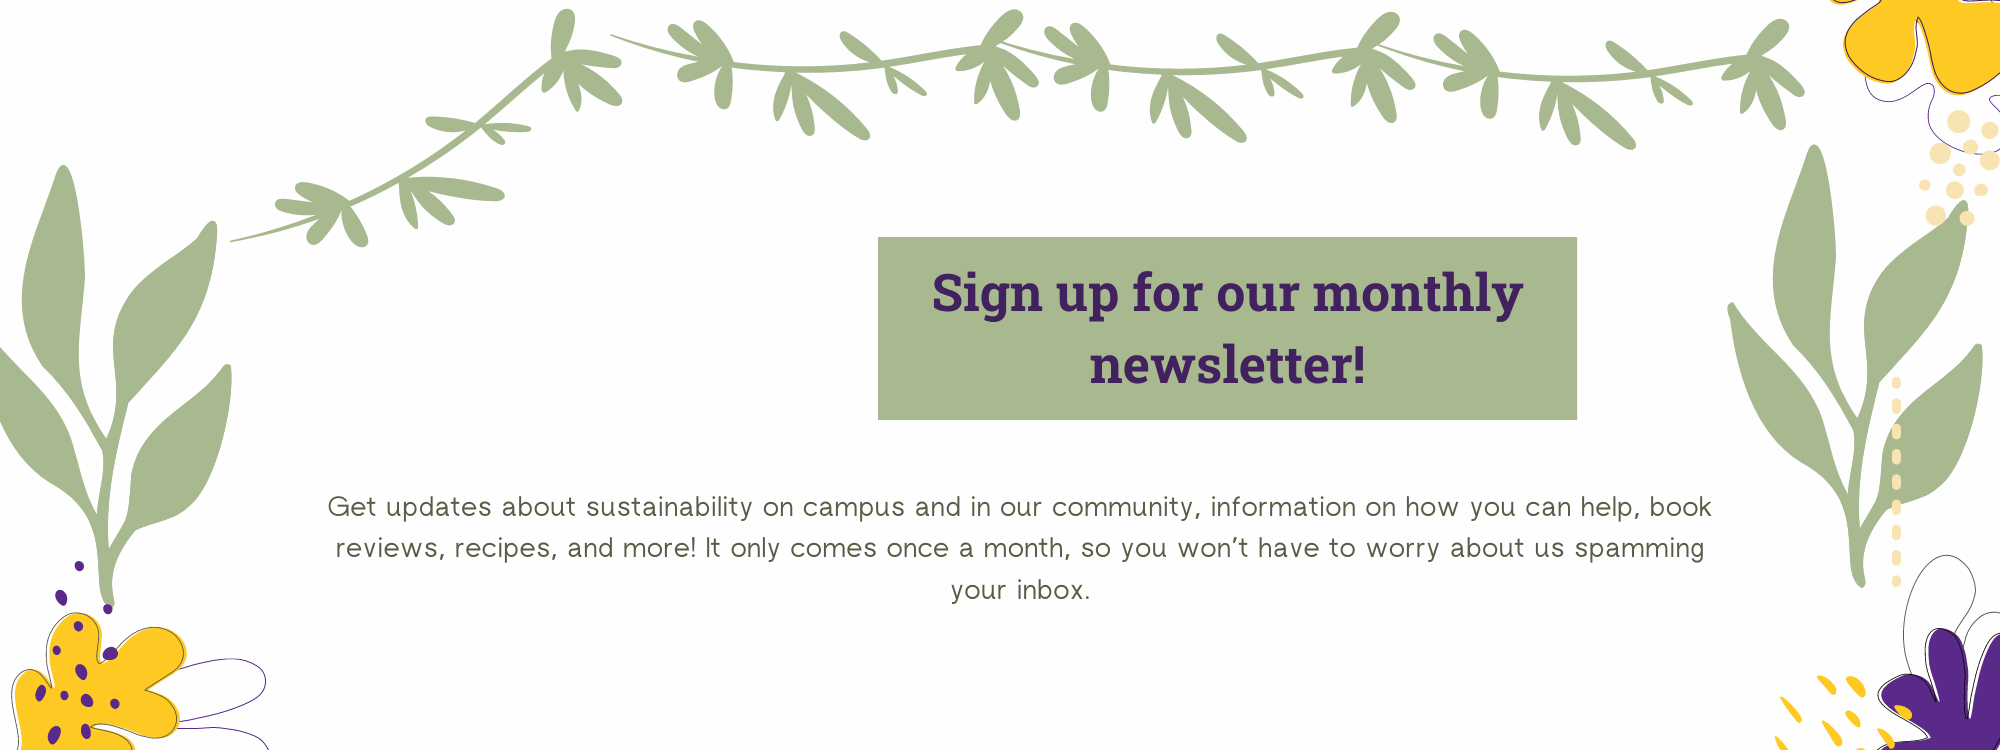 Sign up for our monthly newsletter! Get updates about sustainability on campus and in our community, information on how you can help, book reviews, recipes, and more! It only comes once a month, so you won’t have to worry about us spamming your inbox.